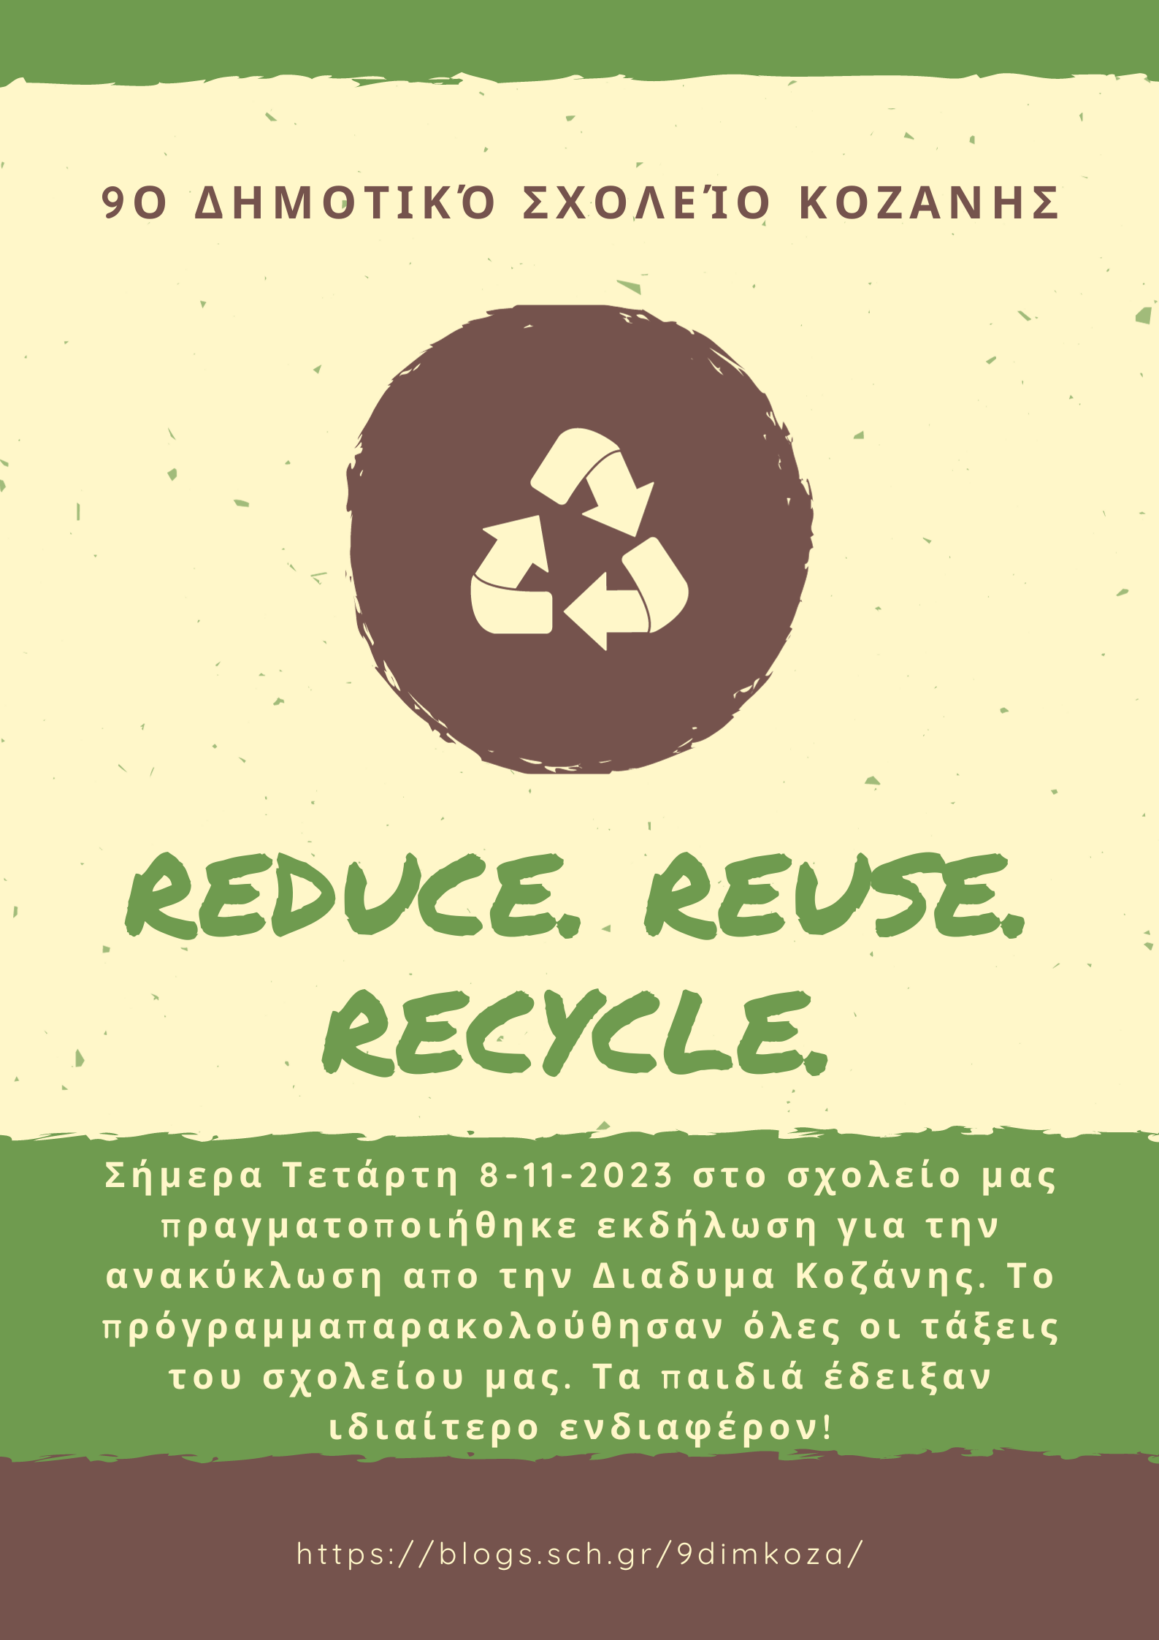 Green Brown Grunge Eco Friendly Recycling Poster